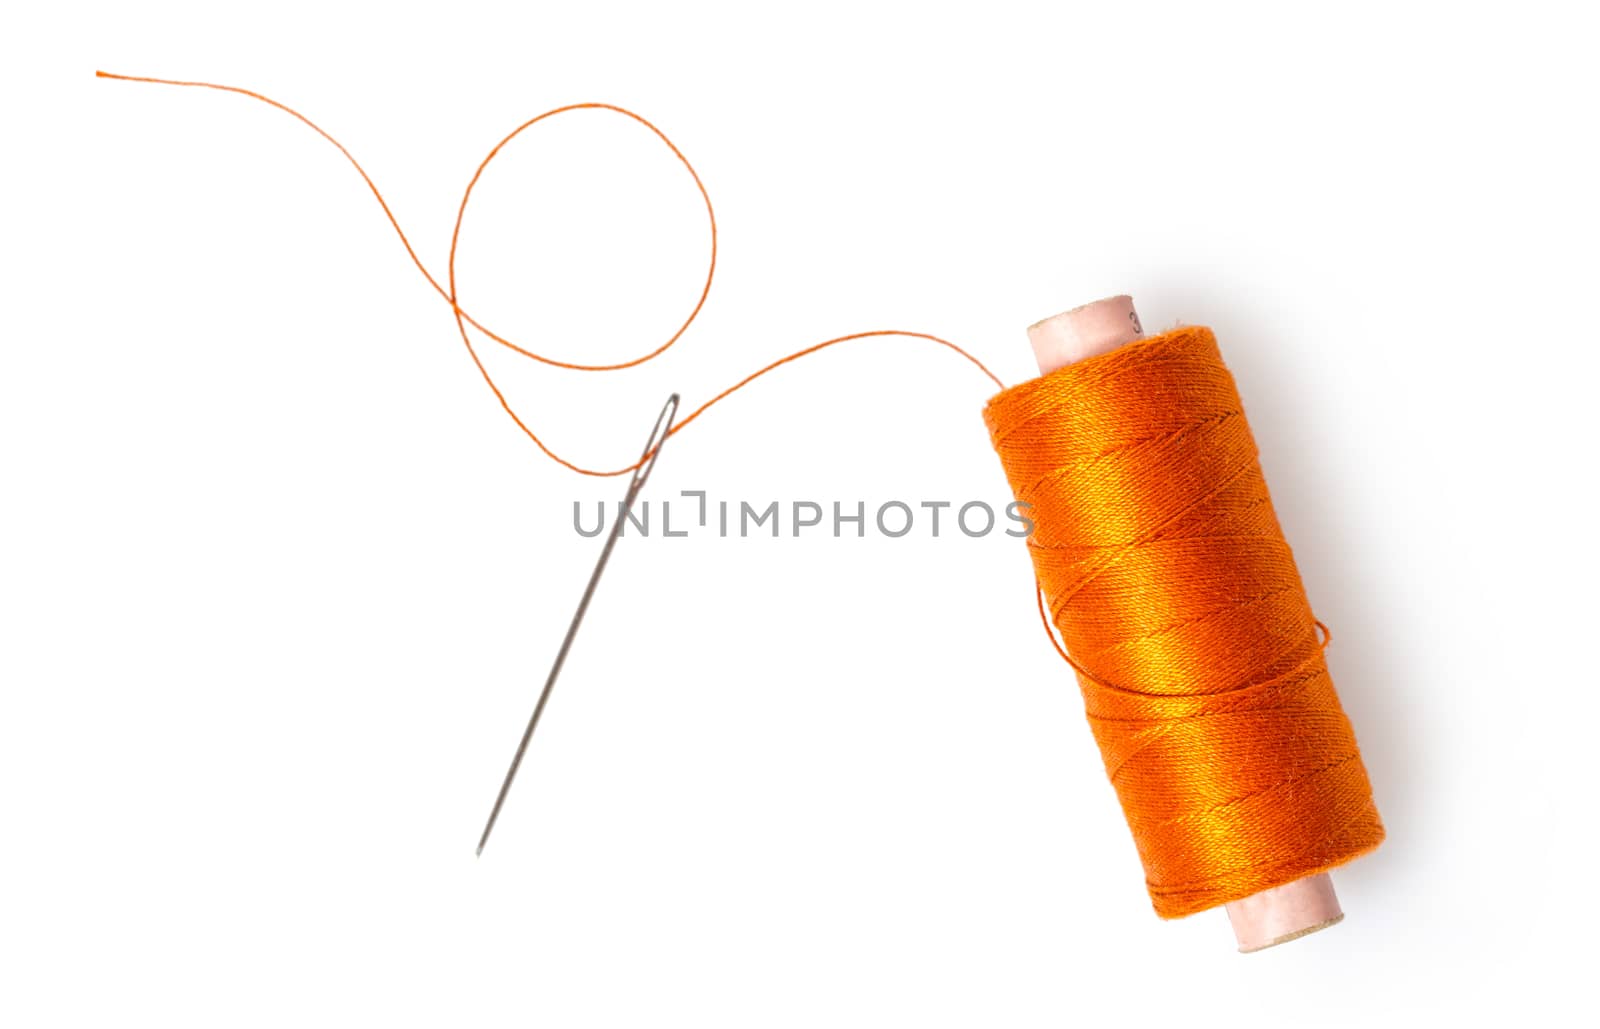 spool of thread with a needle on white isolated background